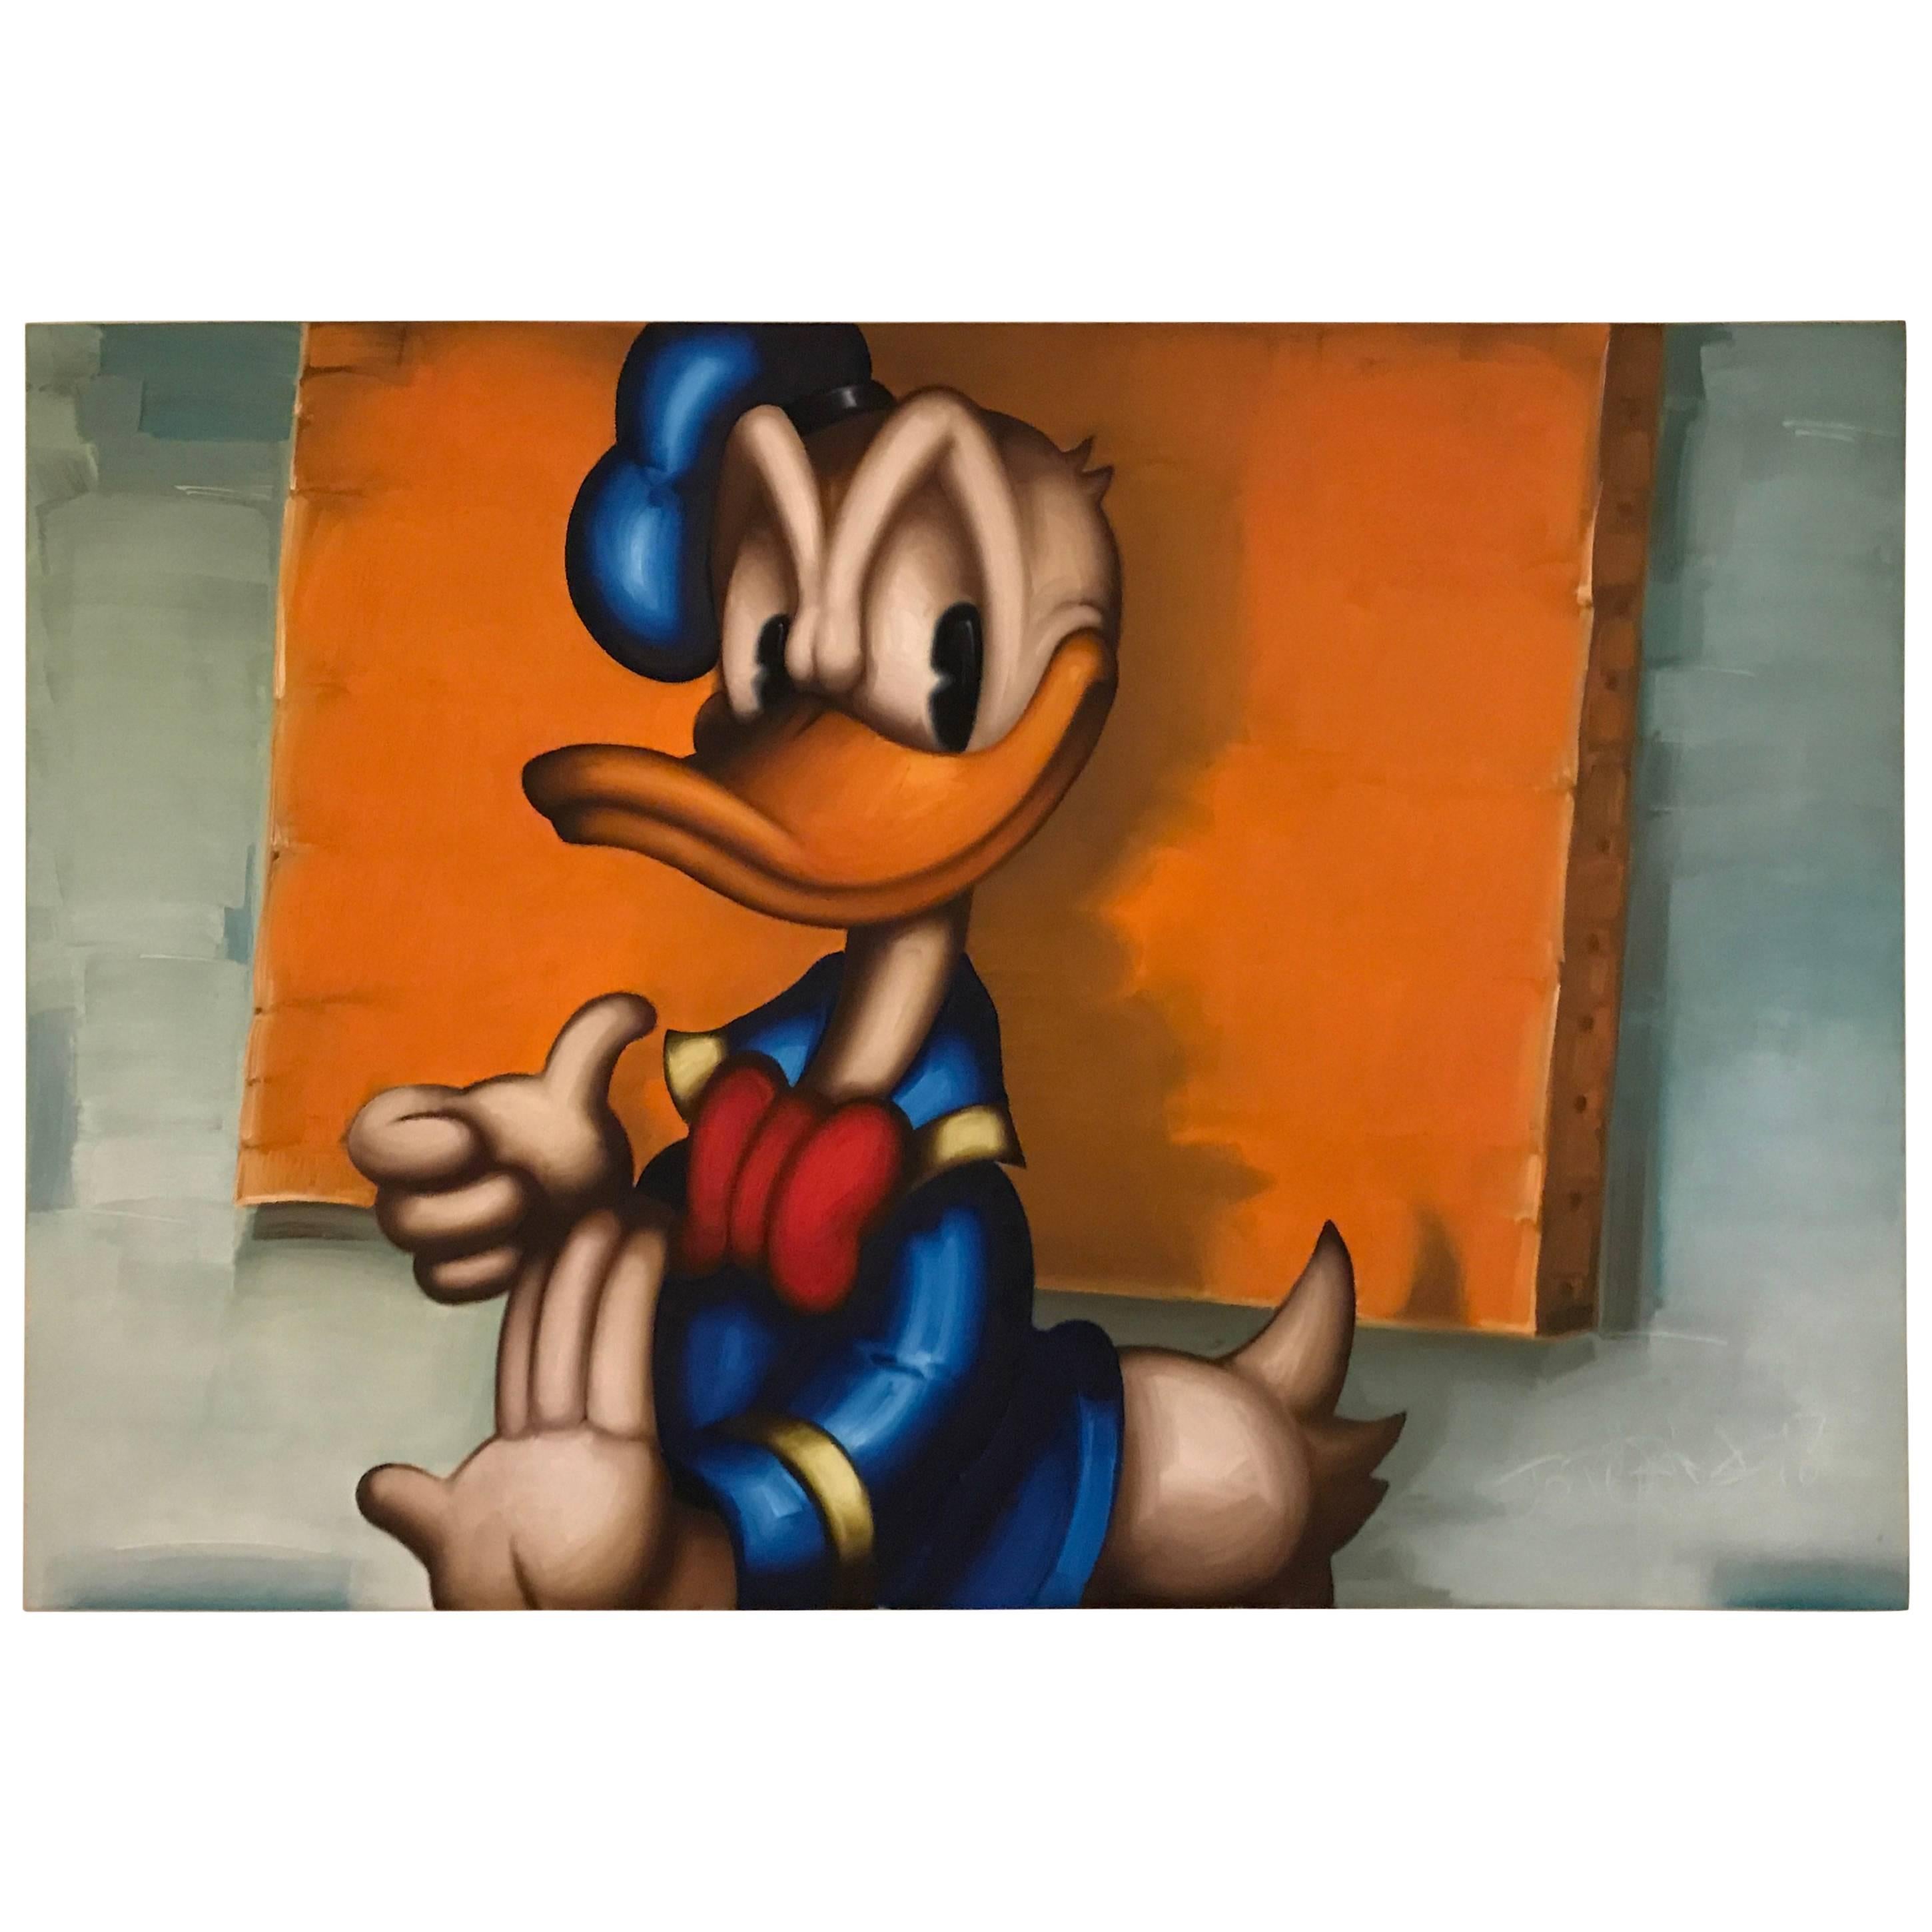 "Donald Duck" by Jörg Döring " 110hx160x5cm" Oil on Canvas Anno, 2000  For Sale